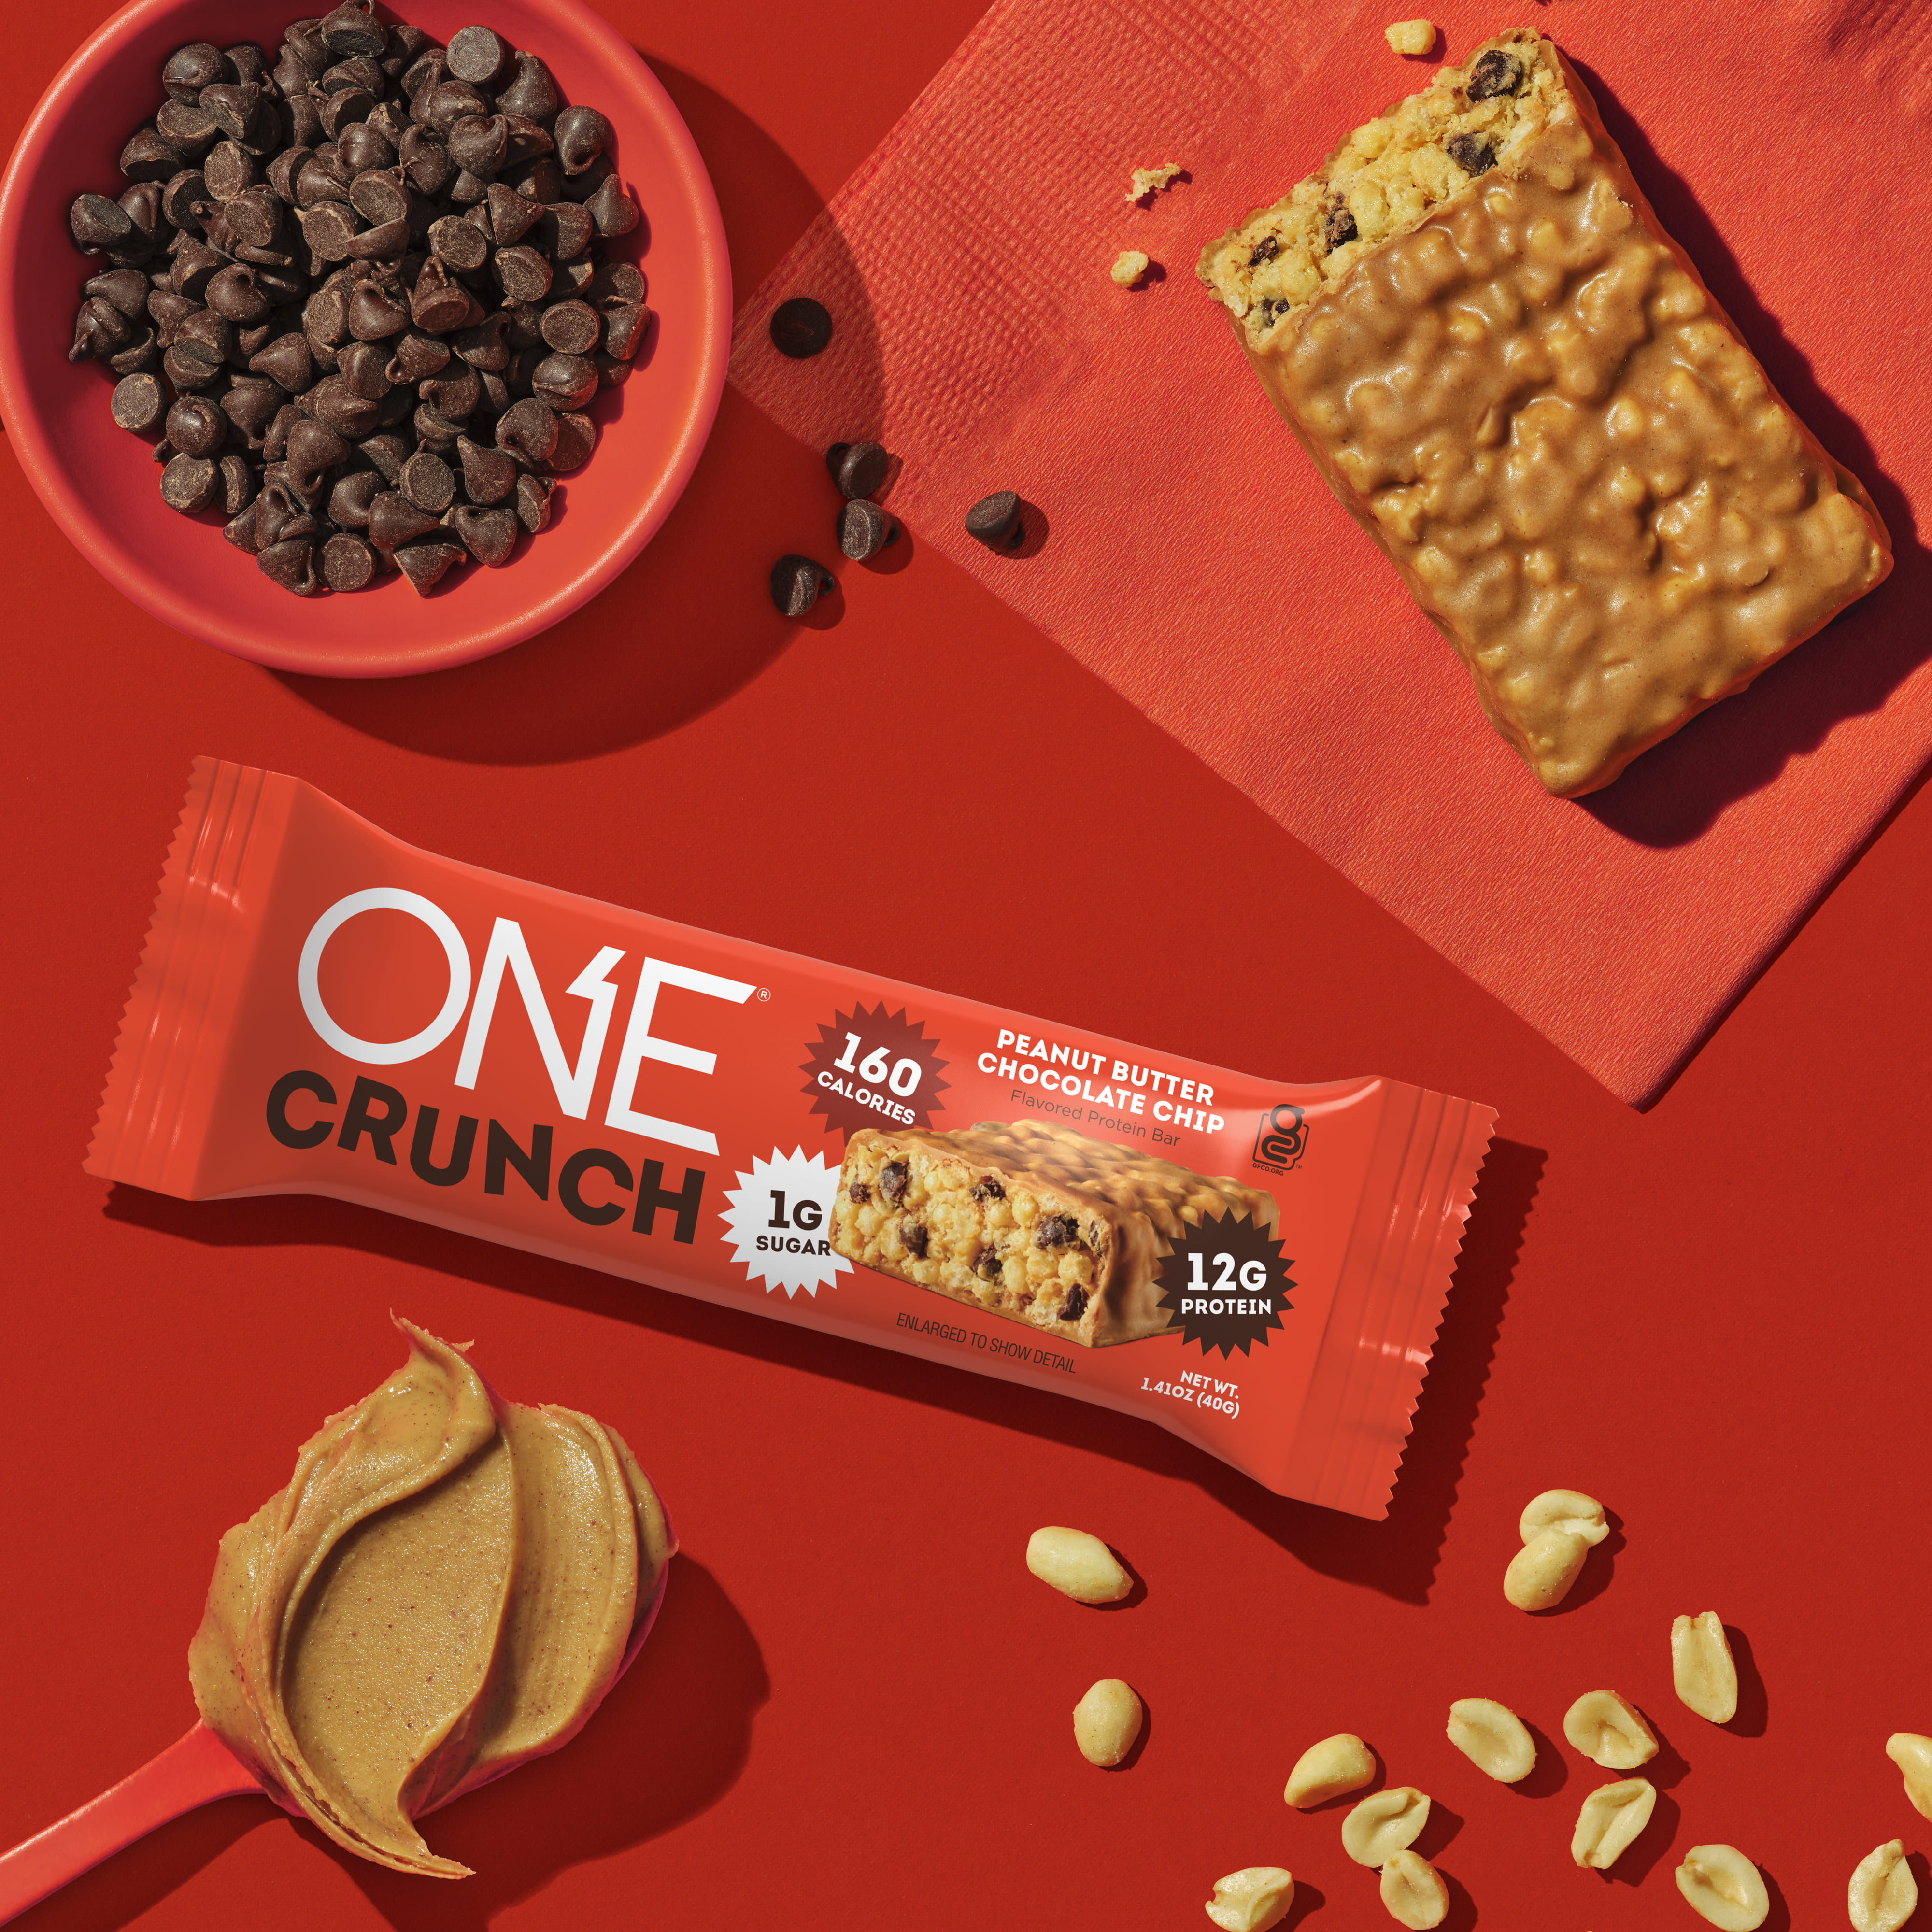 One Crunch Protein Bar, Peanut Butter Chocolate Chip, 12g Protein, 4 Ct - image 3 of 5